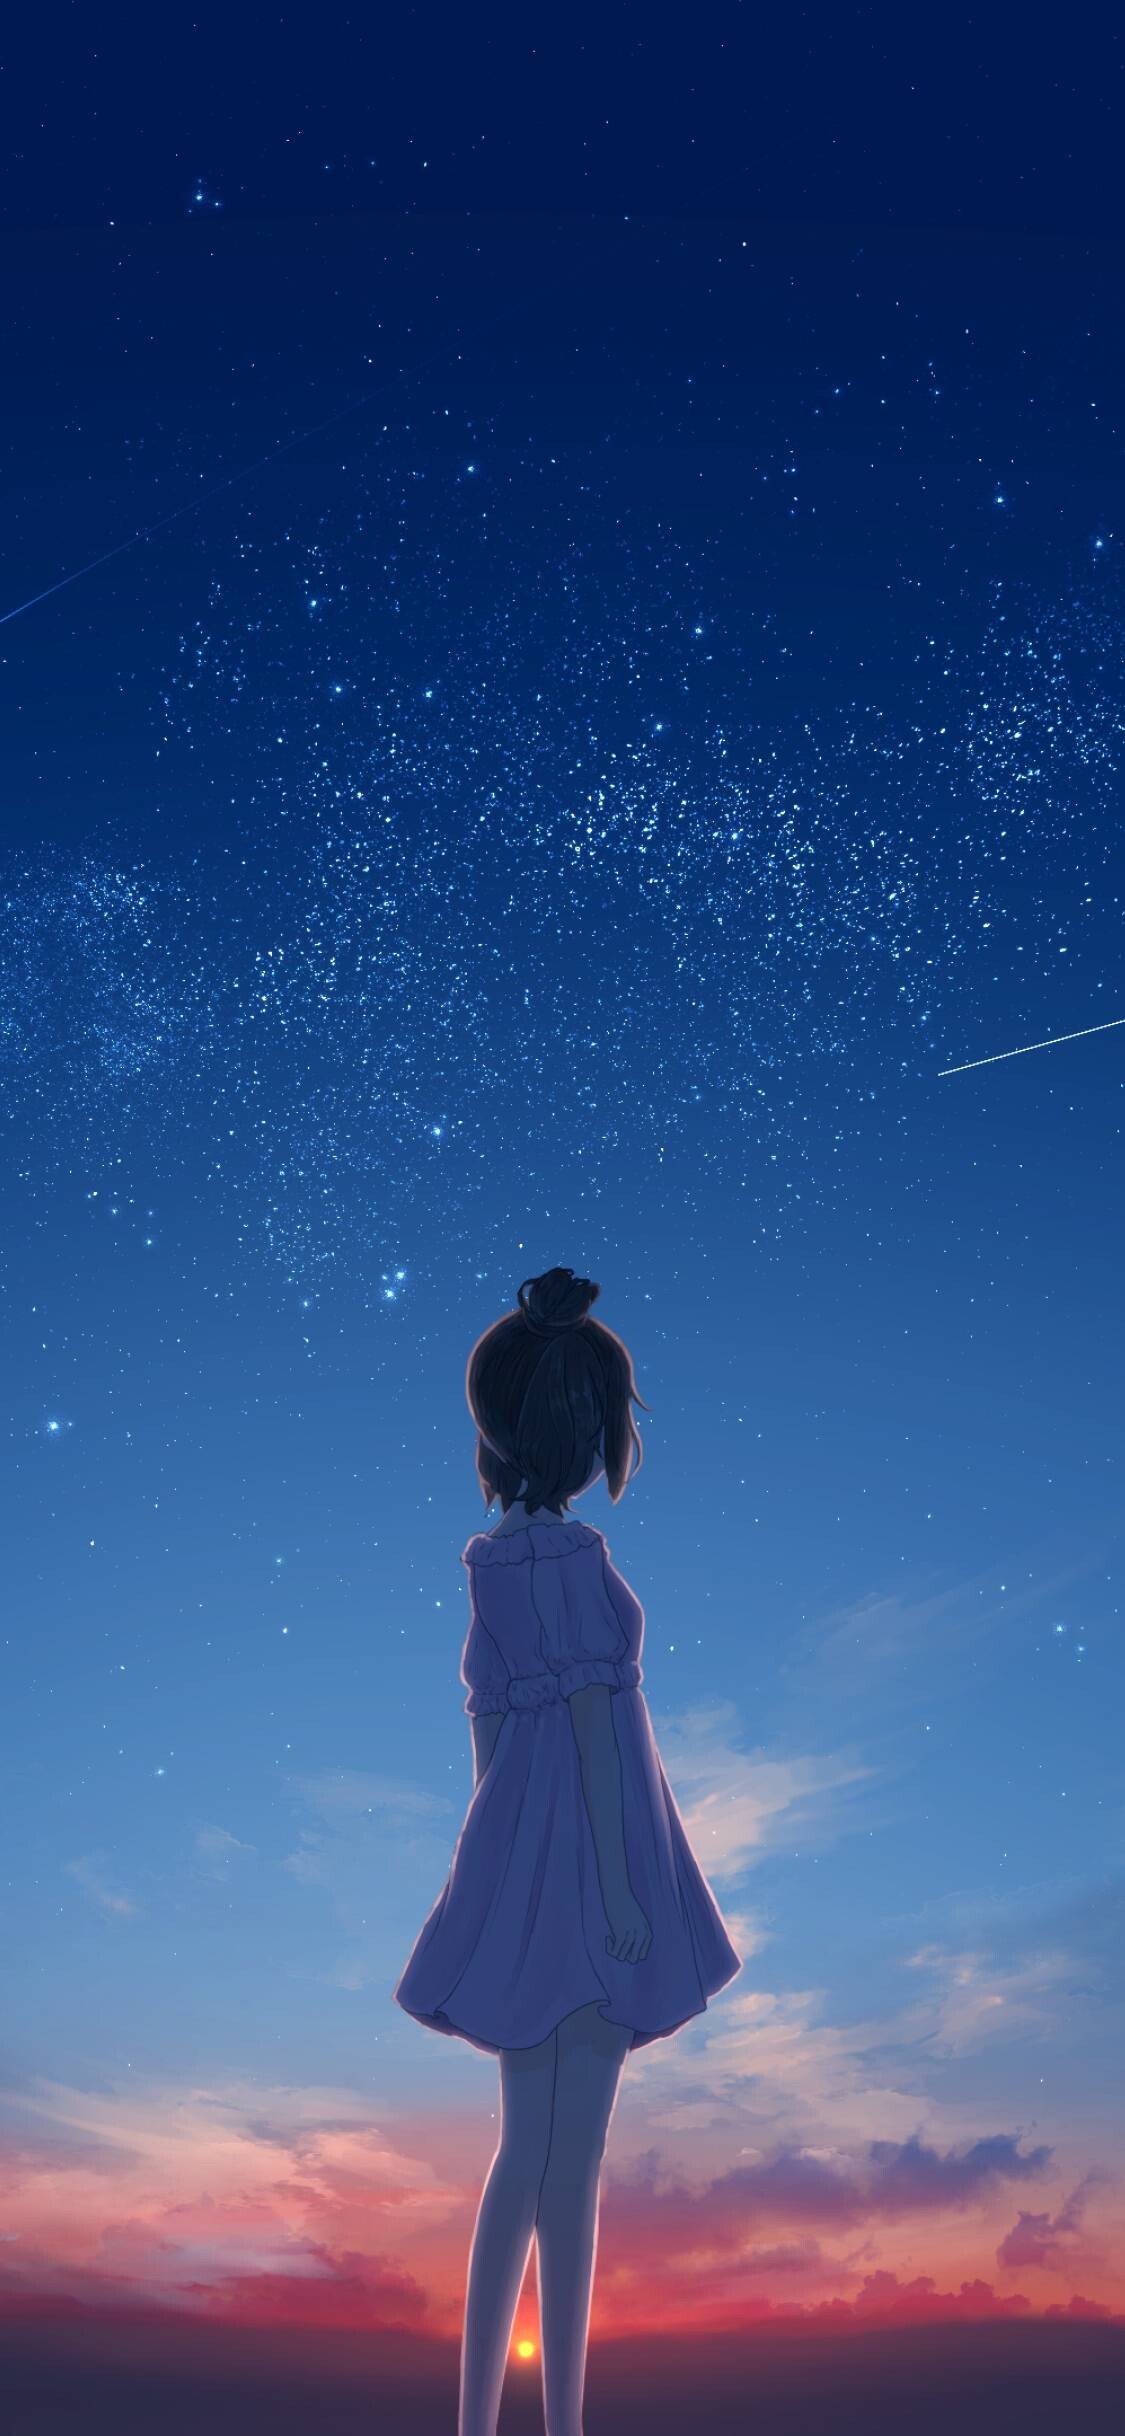 Girly: Anime character, The rising sun, The girl watching the falling star. 1130x2440 HD Background.